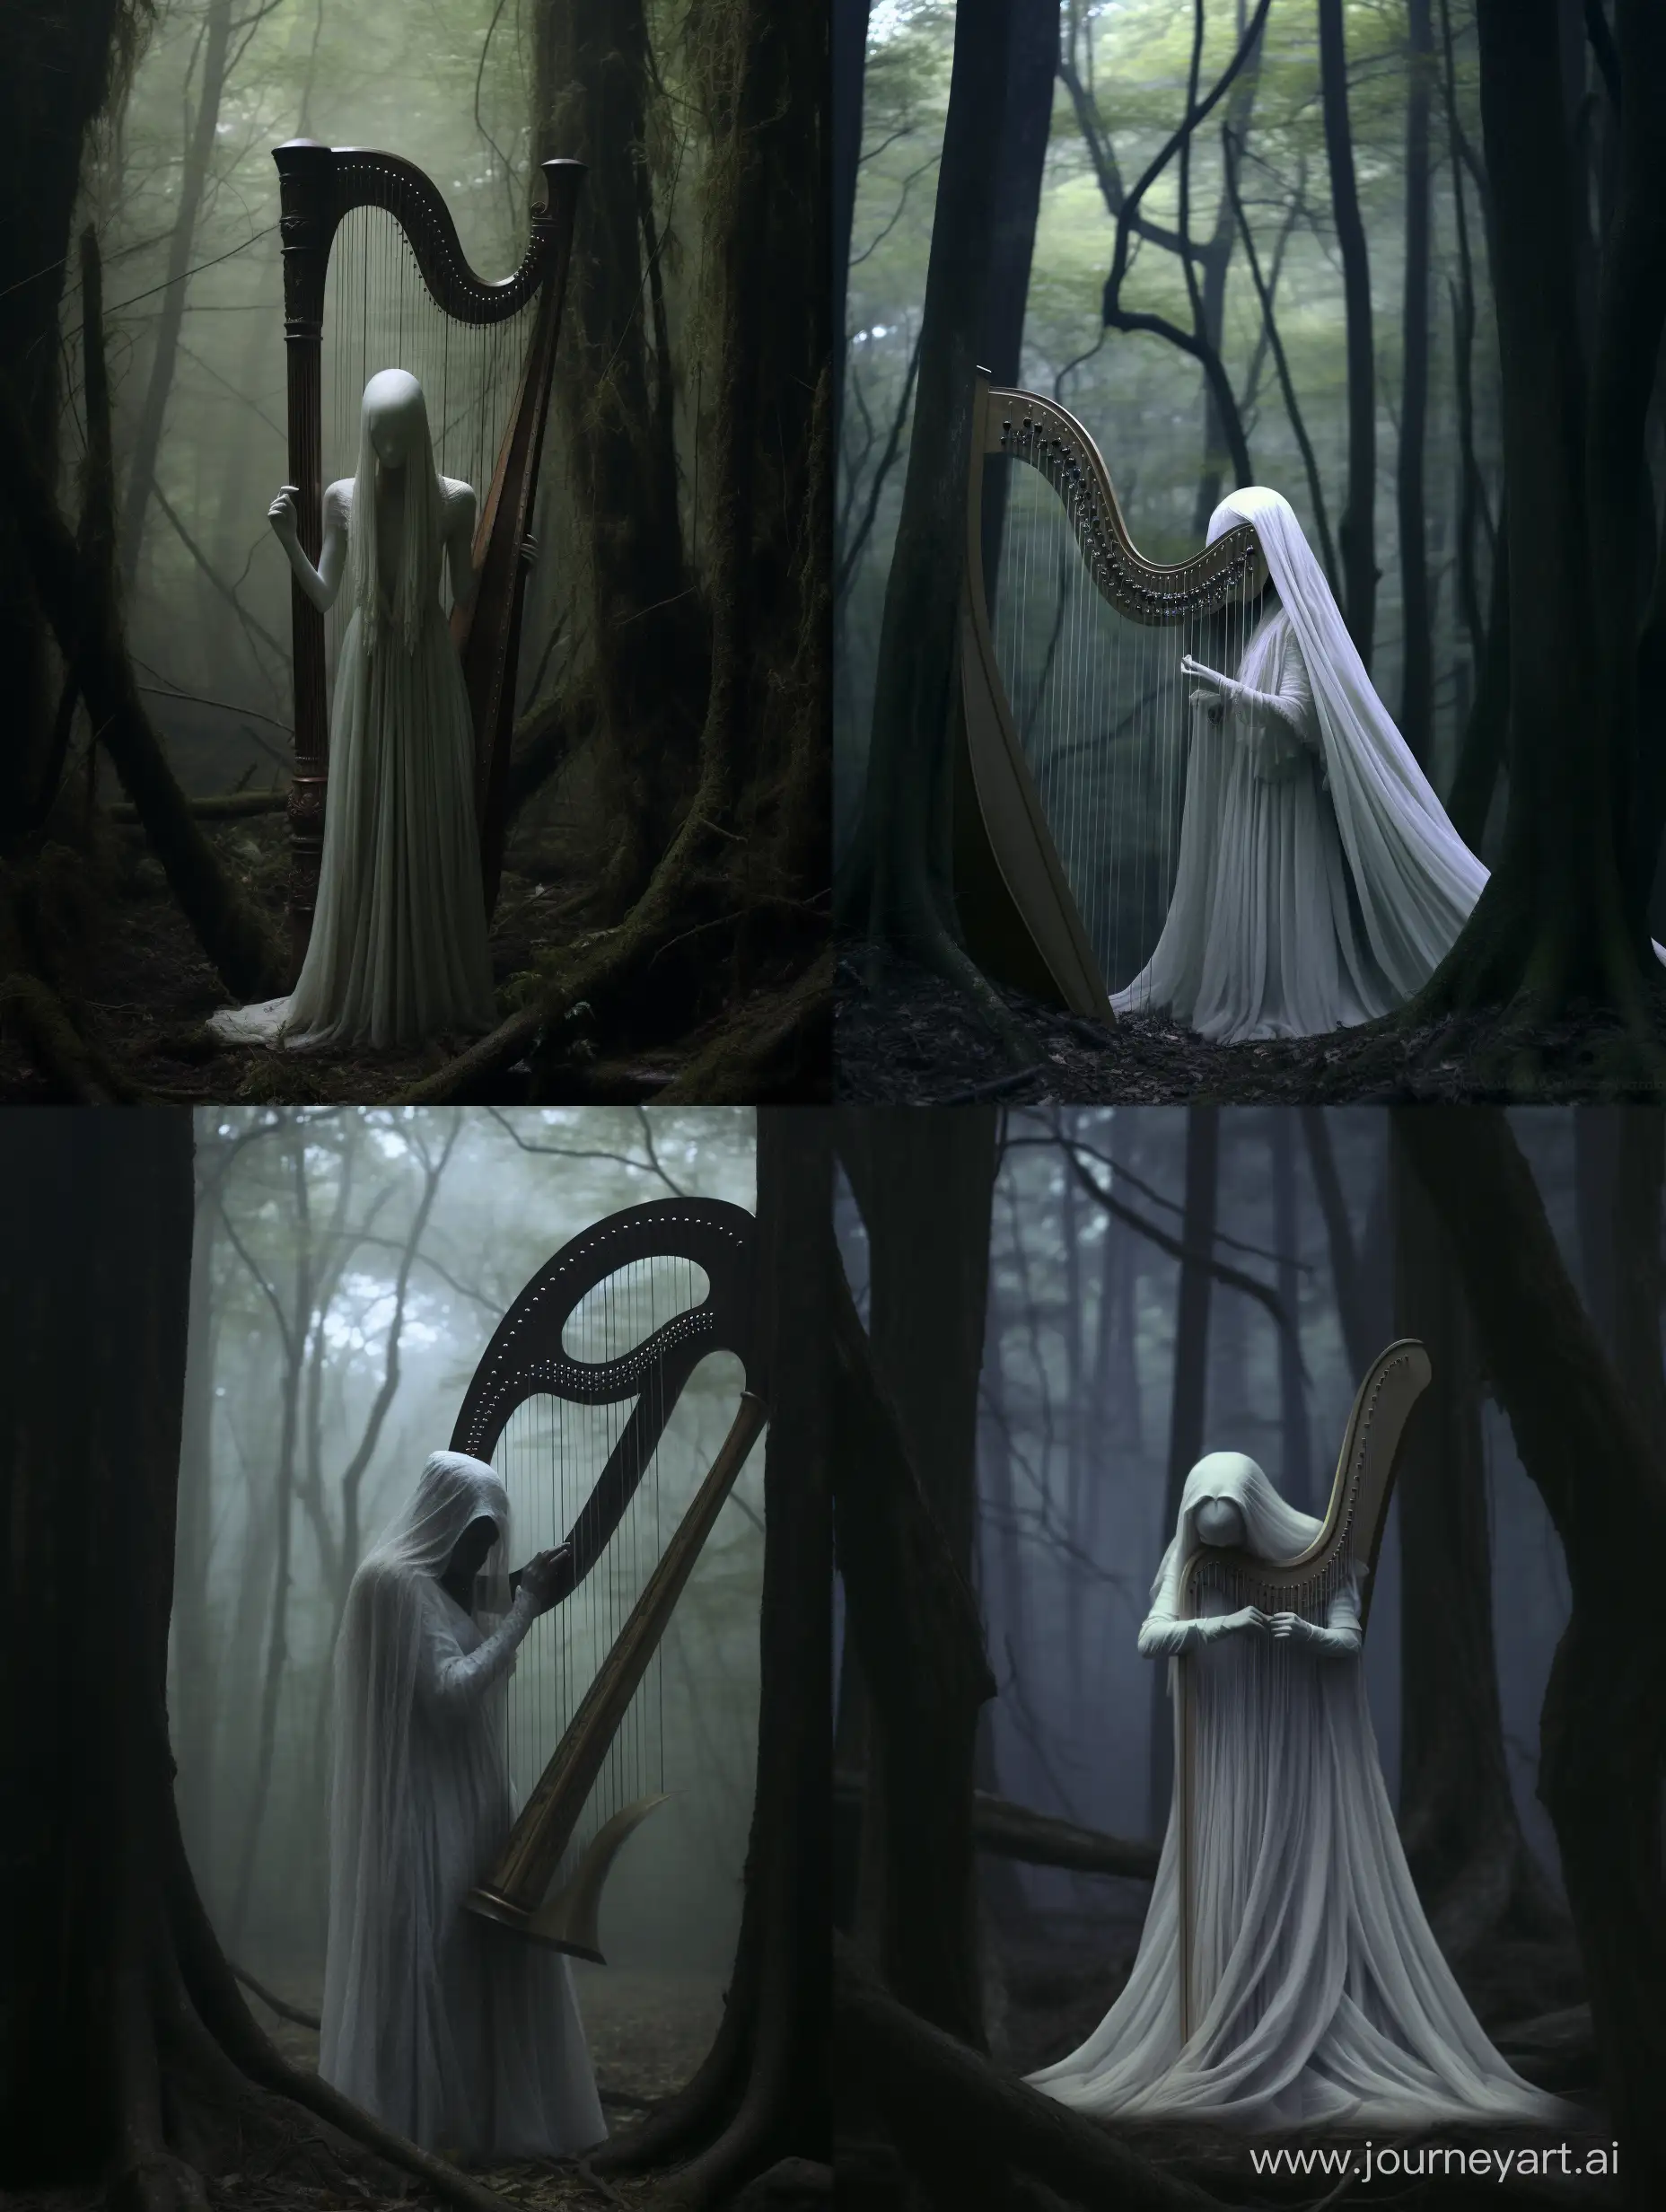 Ethereal-Figure-Playing-Large-Harp-in-Creepy-Minimalistic-Forest